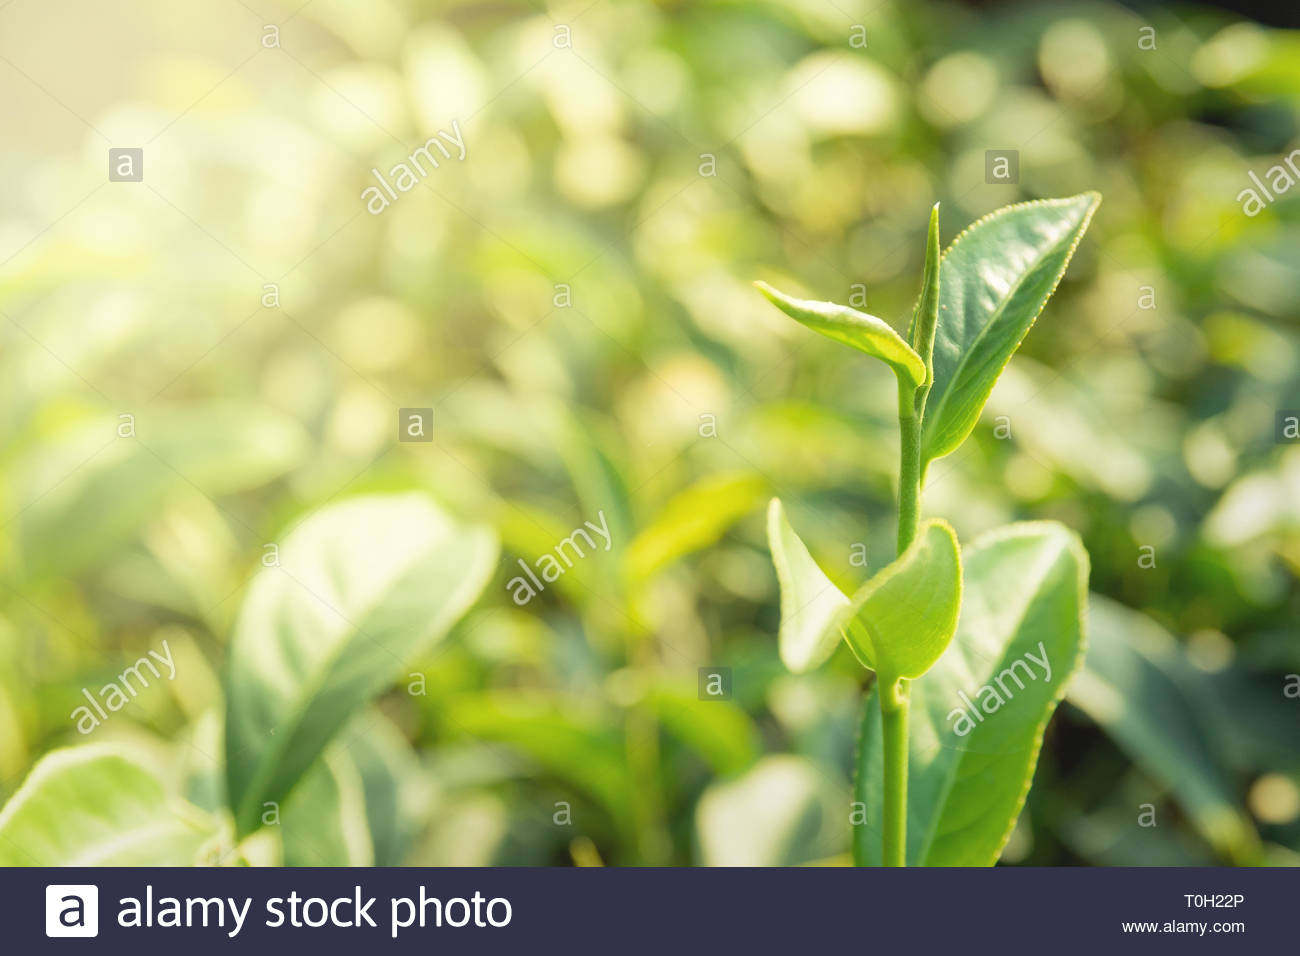 Nature Background Green Tea Leaves In The Morning Sun Stock Photo